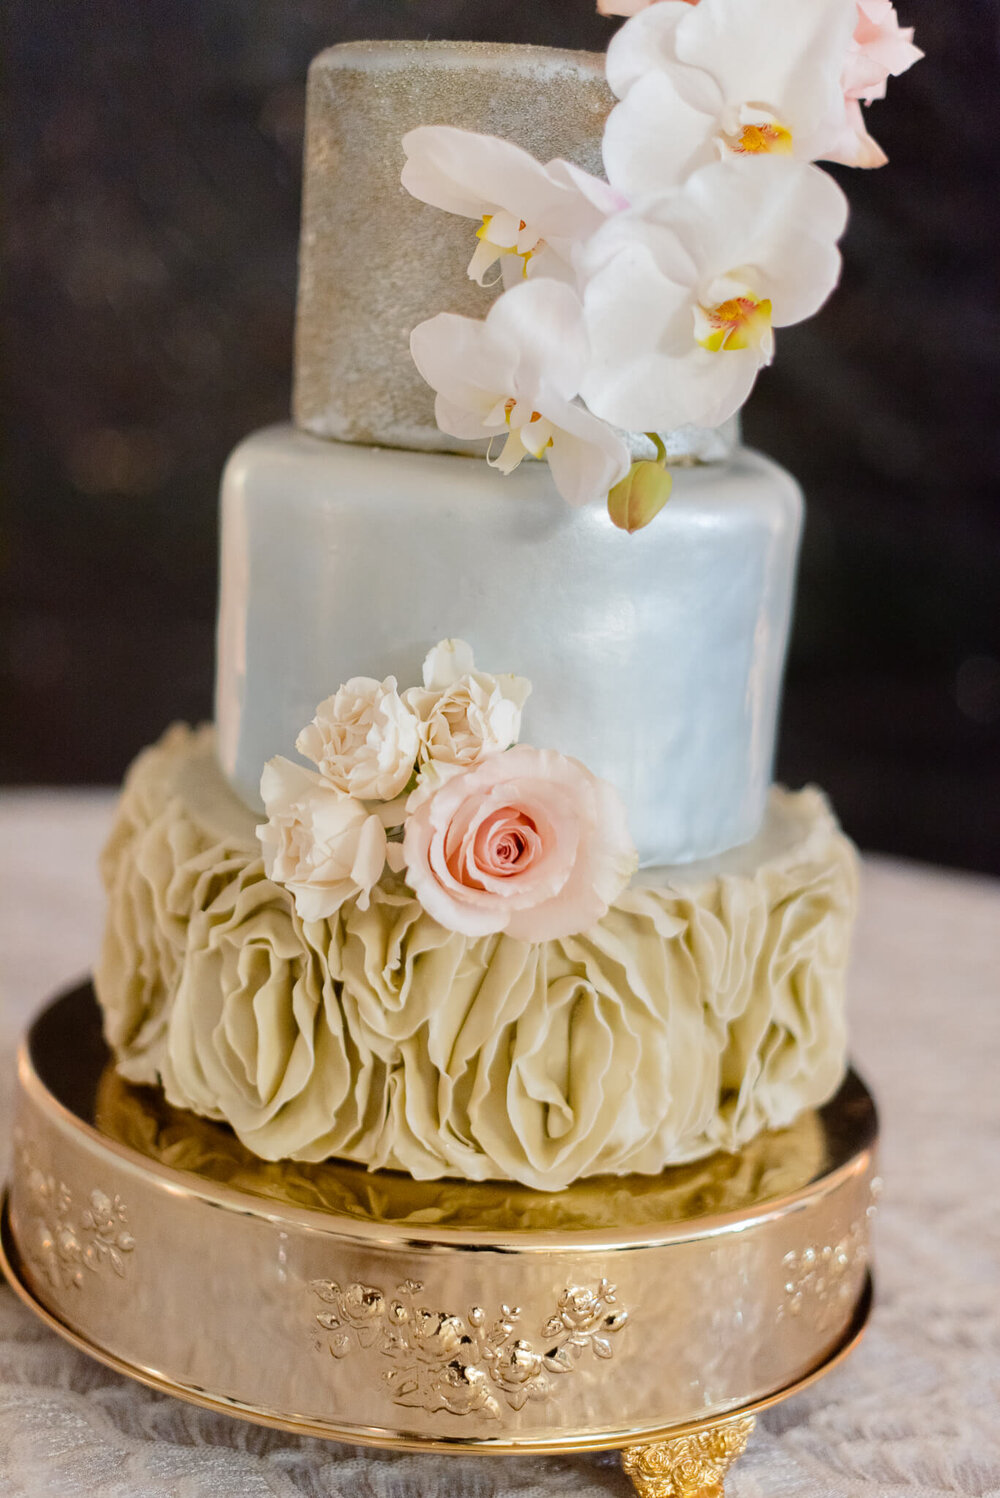 wedding cake at biltmore estate wedding in asheville nc by nick levine photography